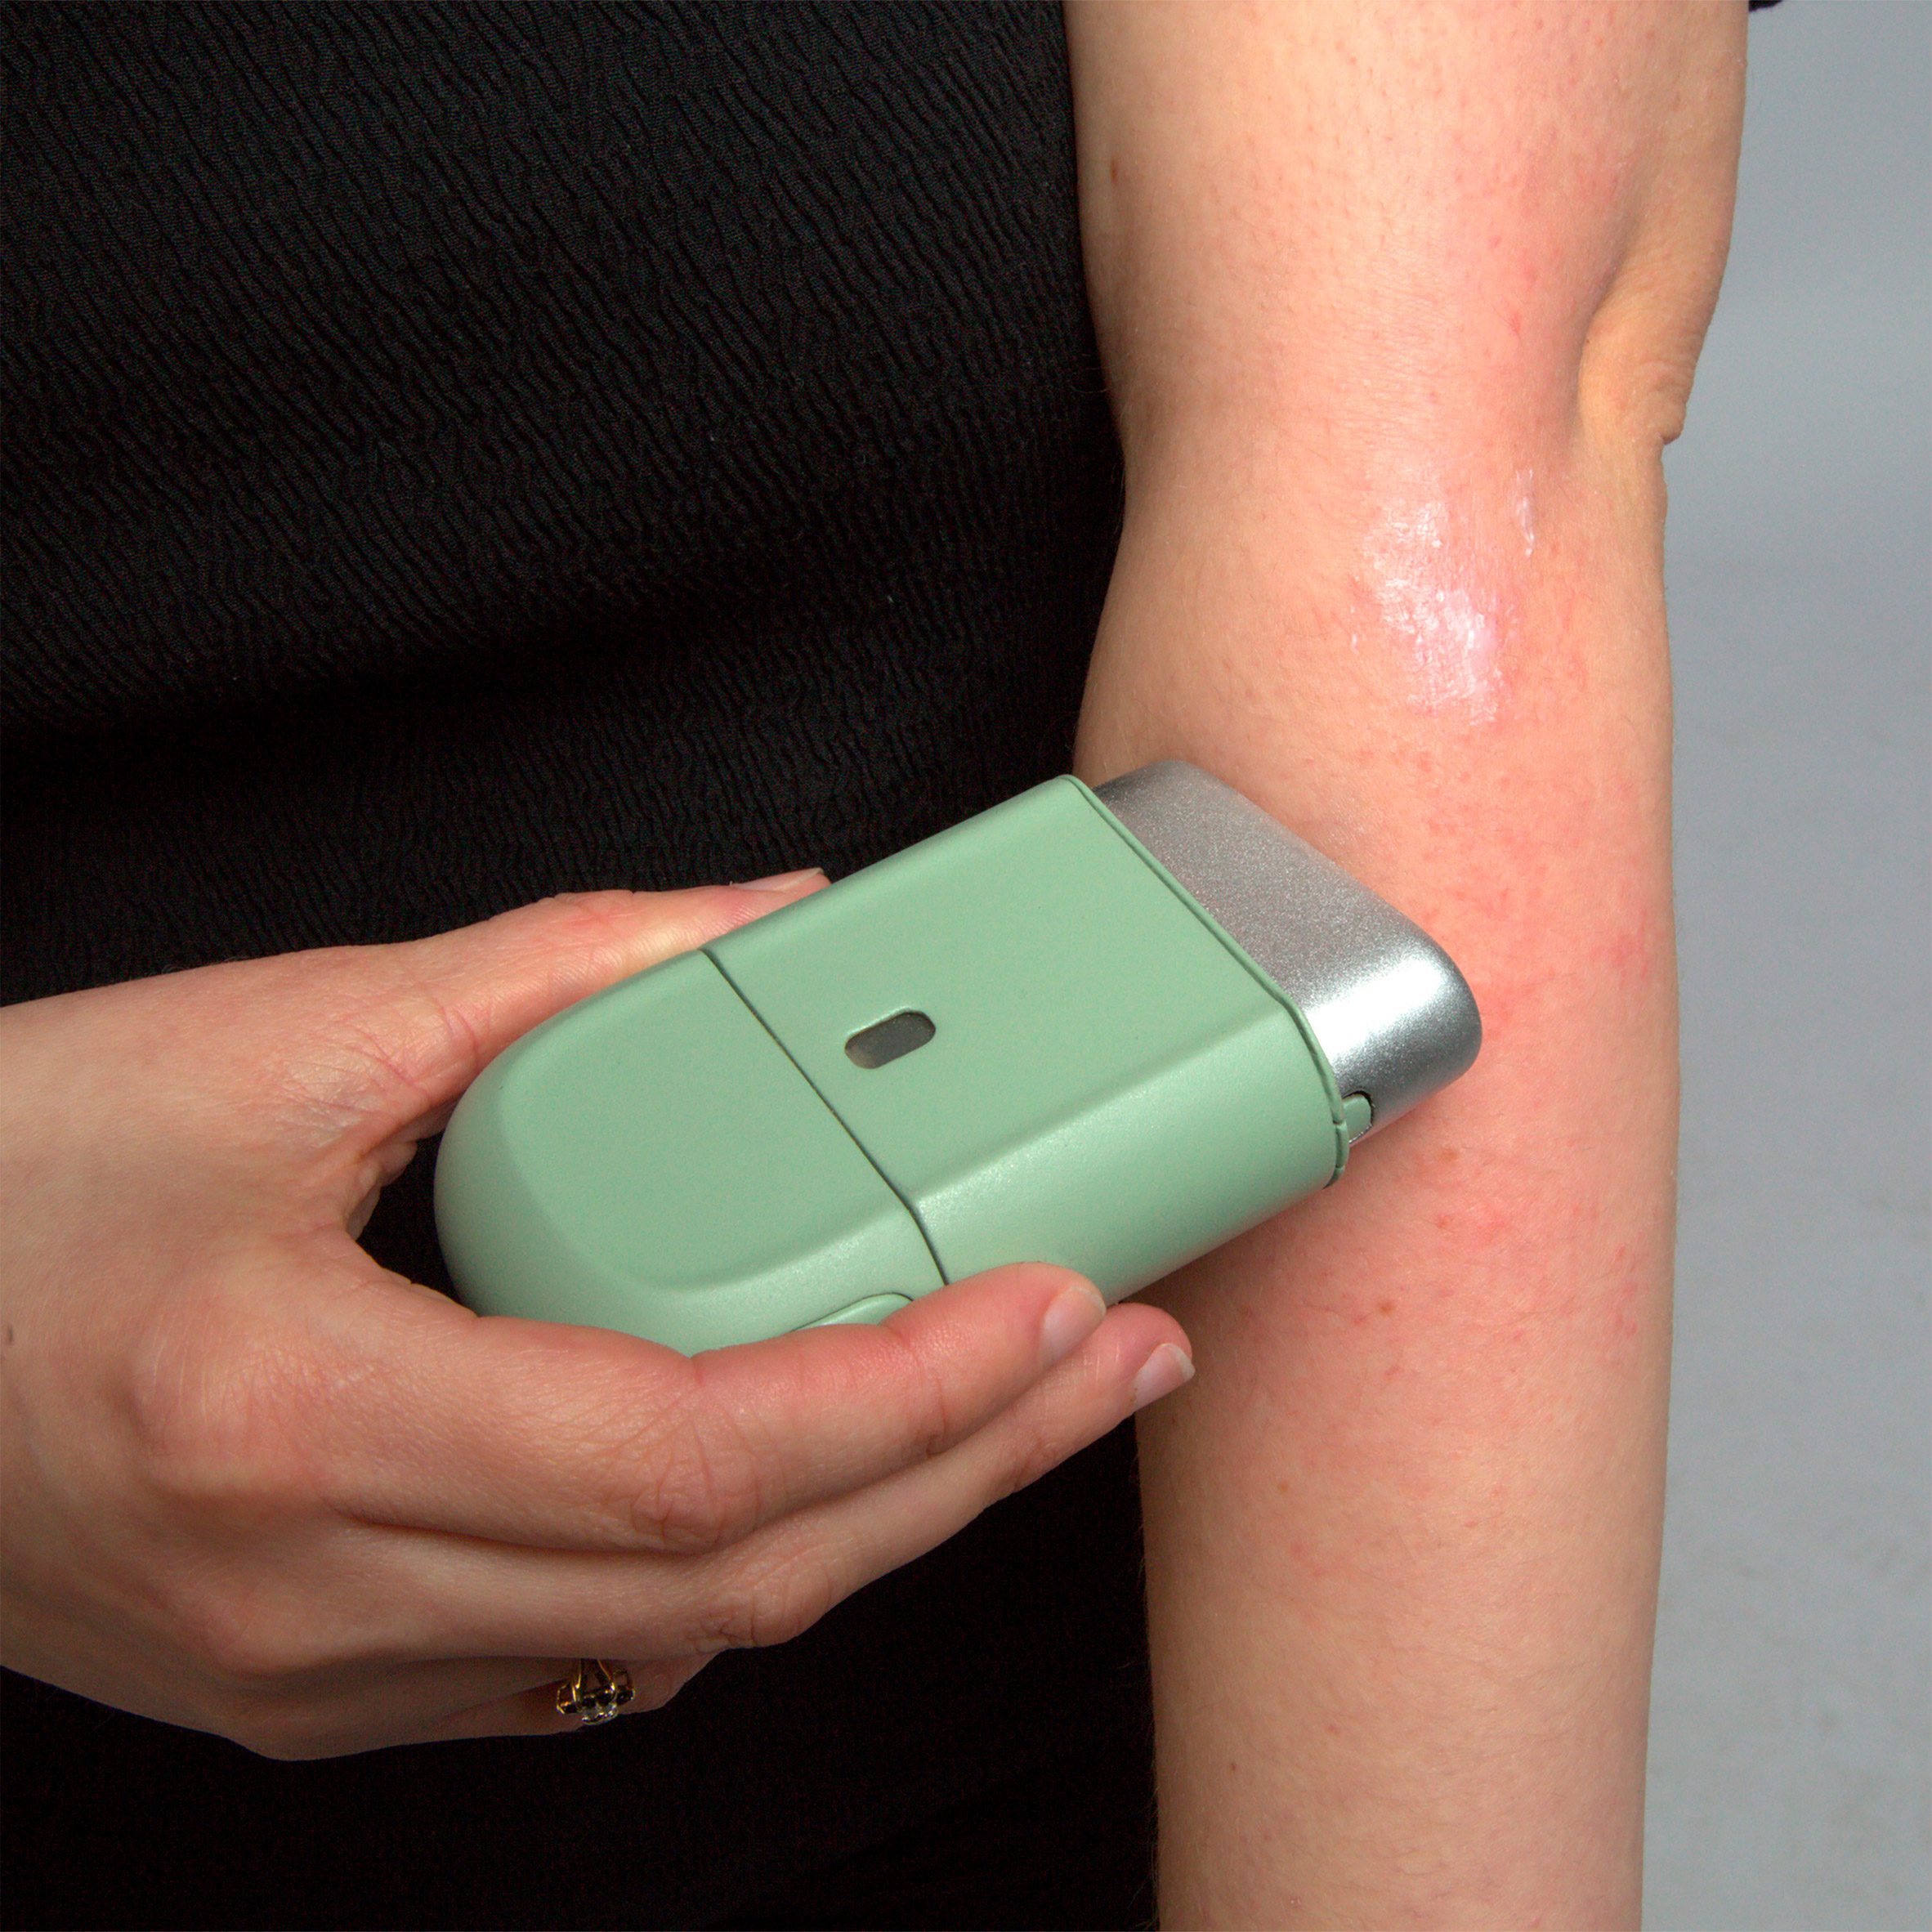 Photograph of device rolling cream onto arm